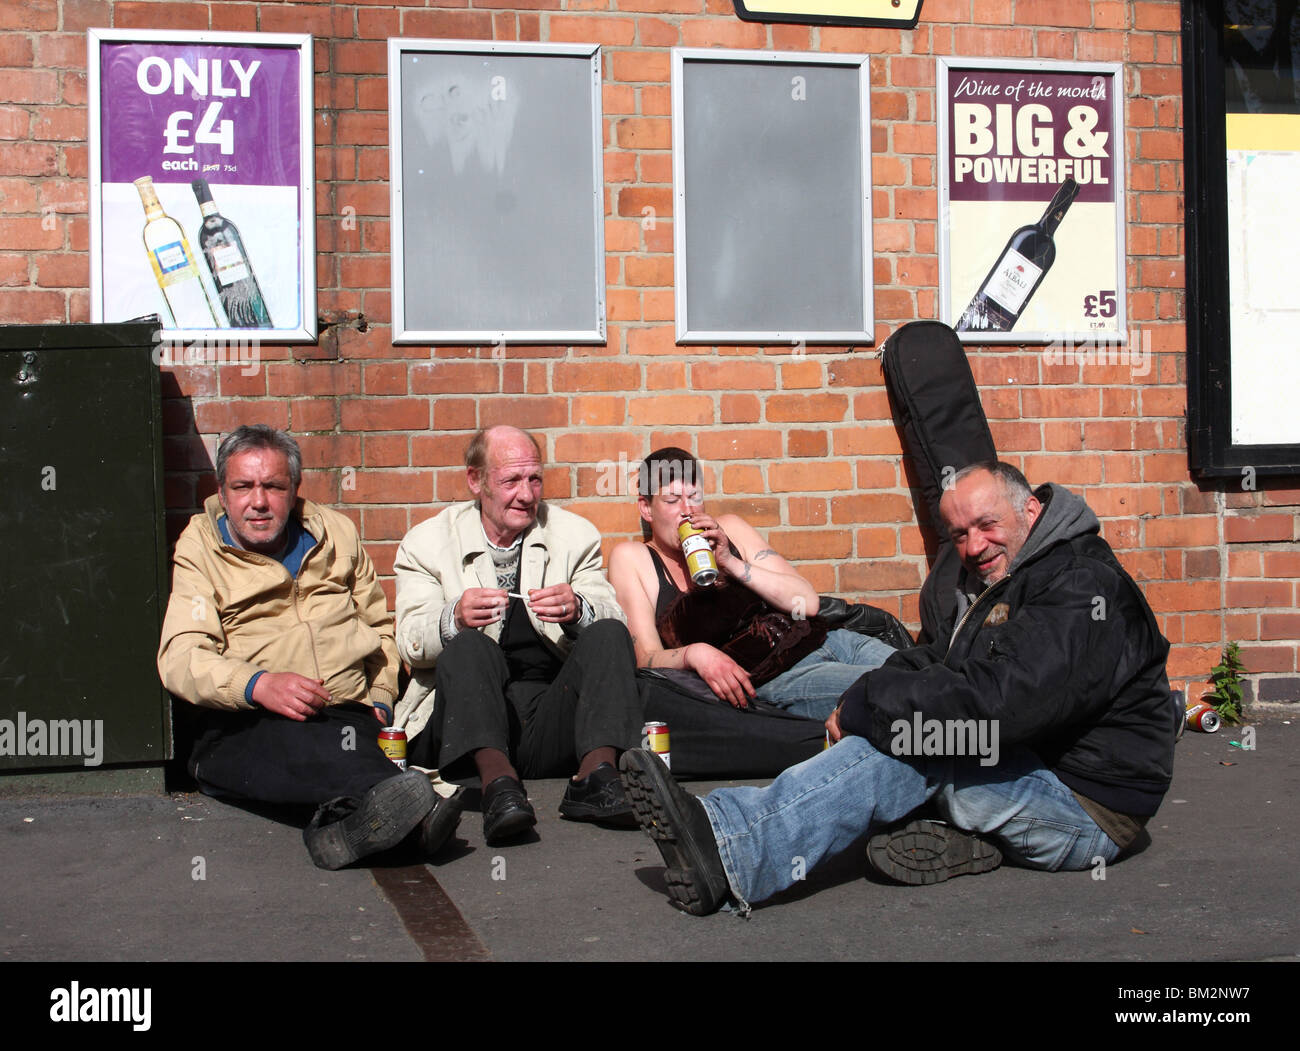 Homeless people drinking alcohol beneath posters advertising cheap alcohol in a U.K. city. Stock Photo